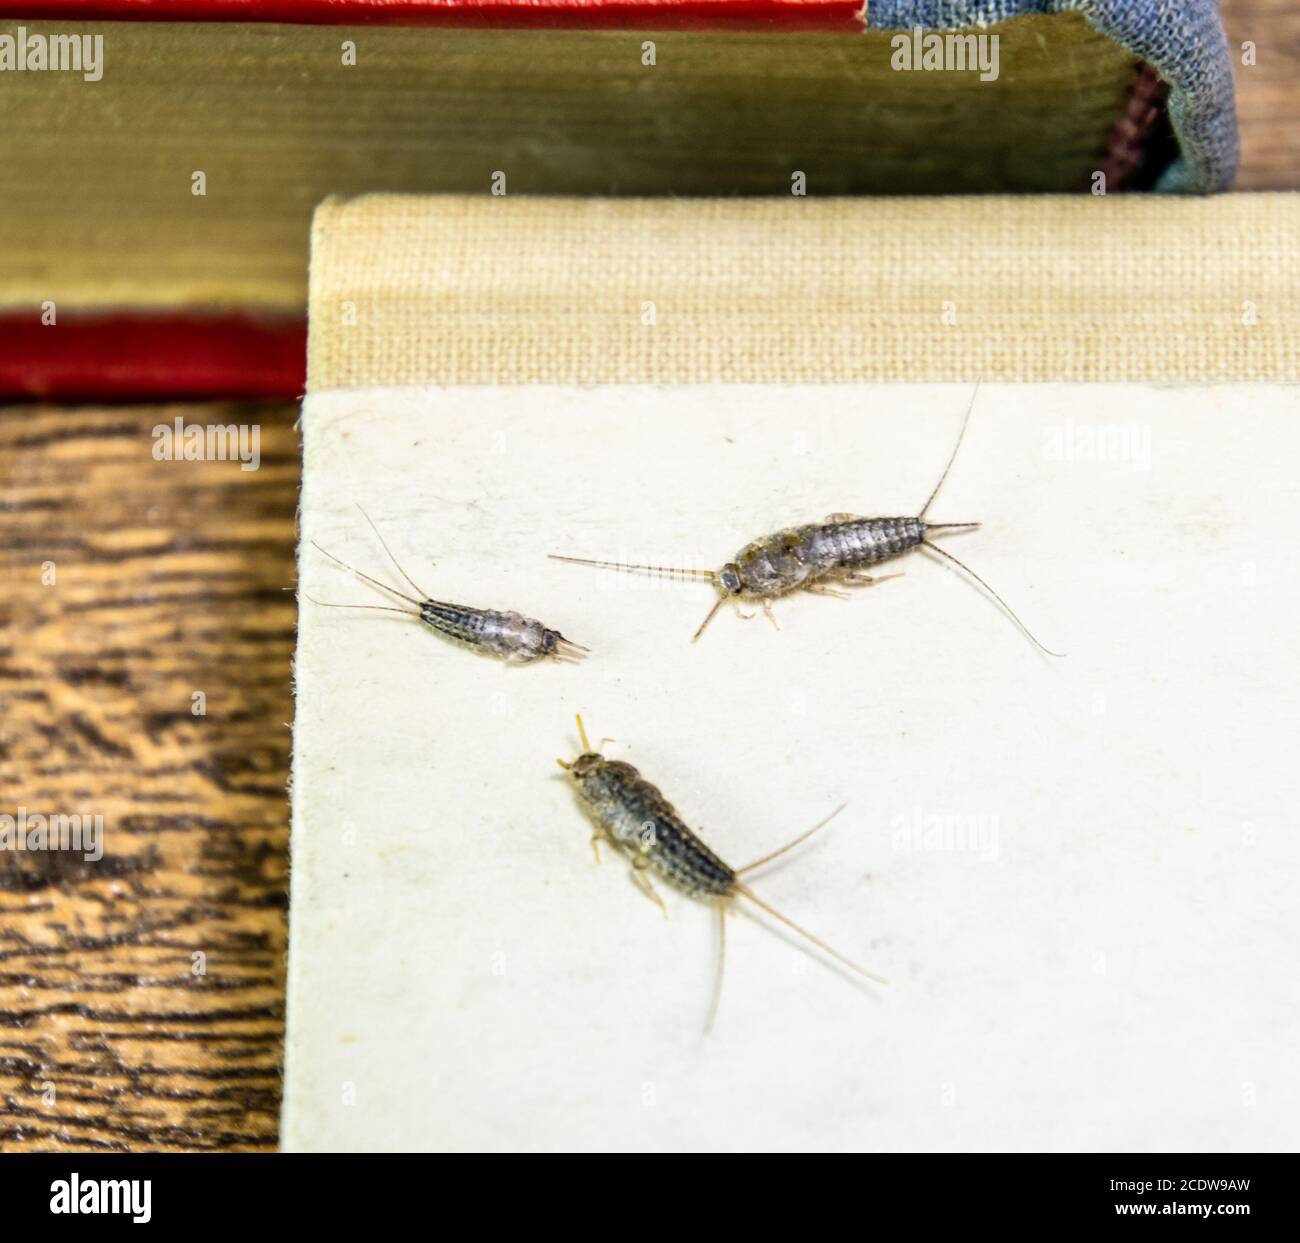 thermobia, Pest books and newspapers. Insect feeding on paper - silverfish, thermobia Stock Photo